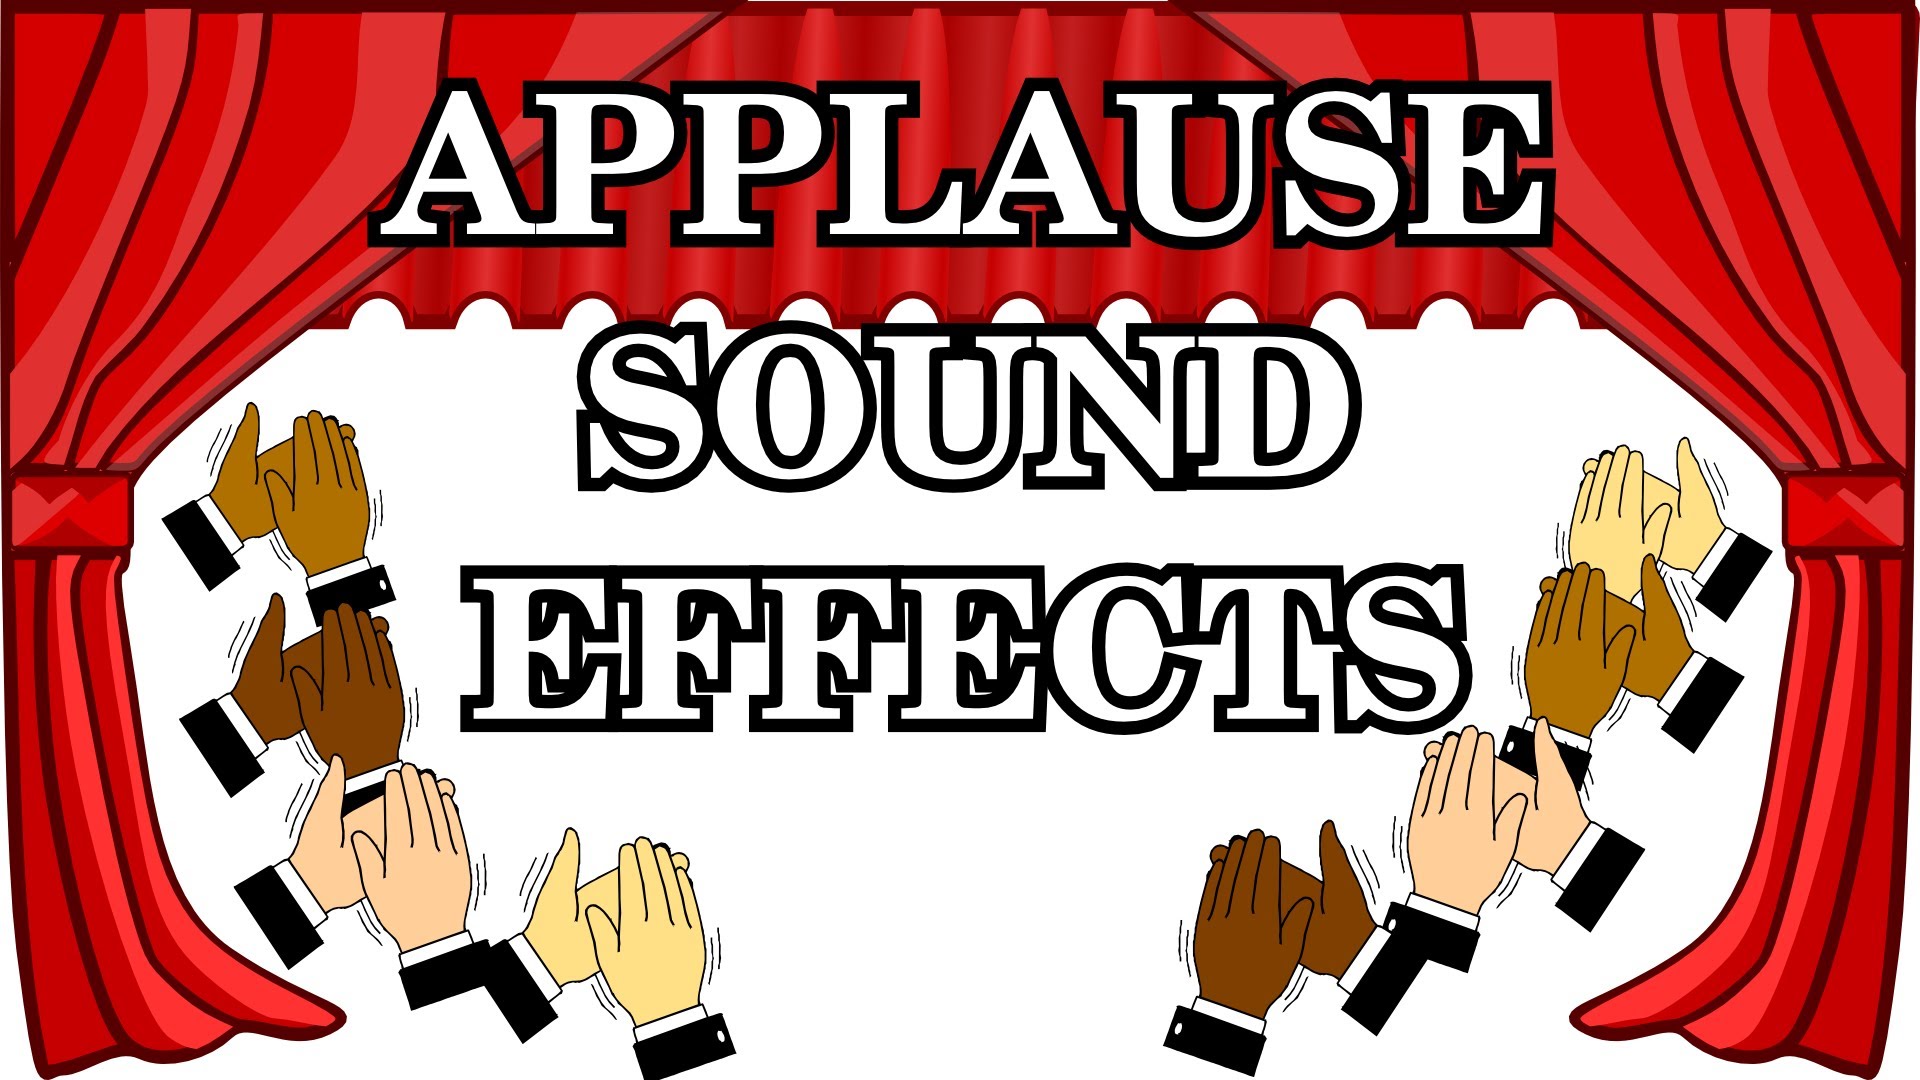 animated applause